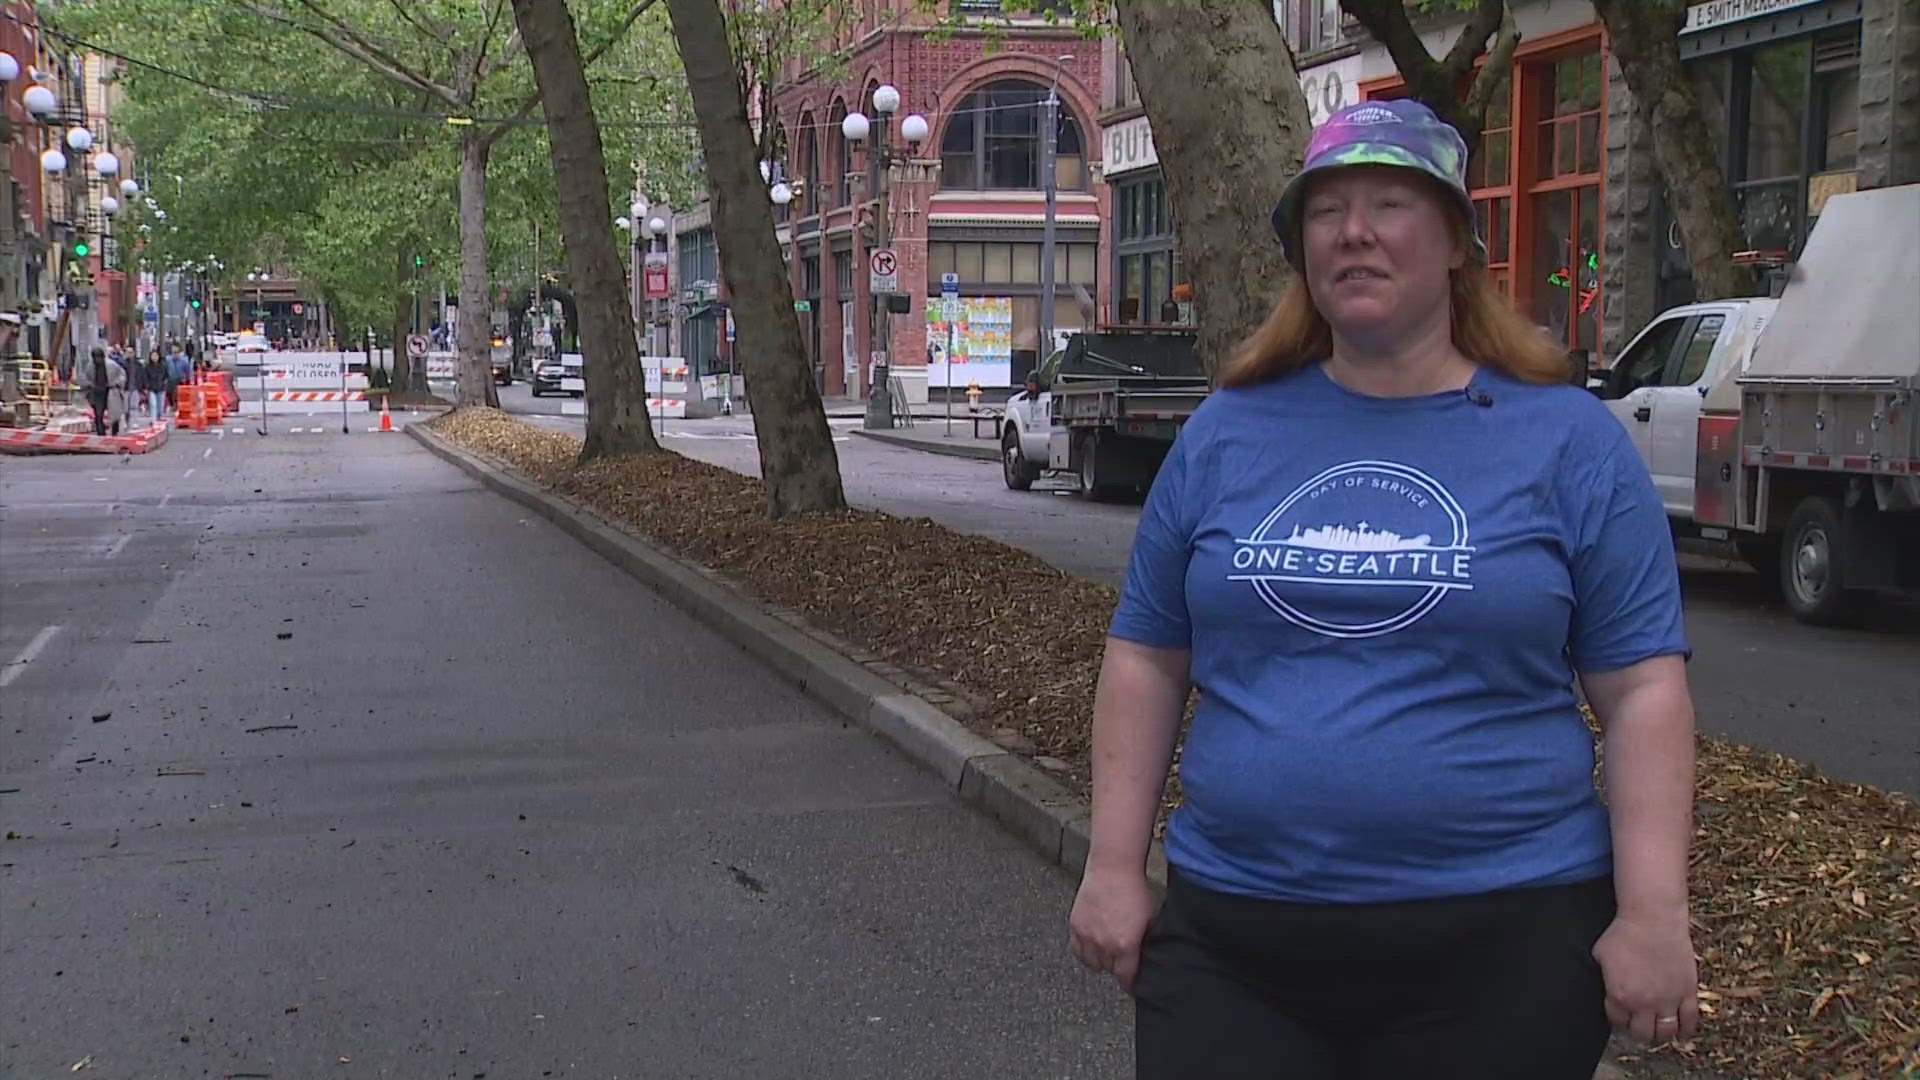 About 250 volunteers showed up at Pioneer Square alone to help clean the area.